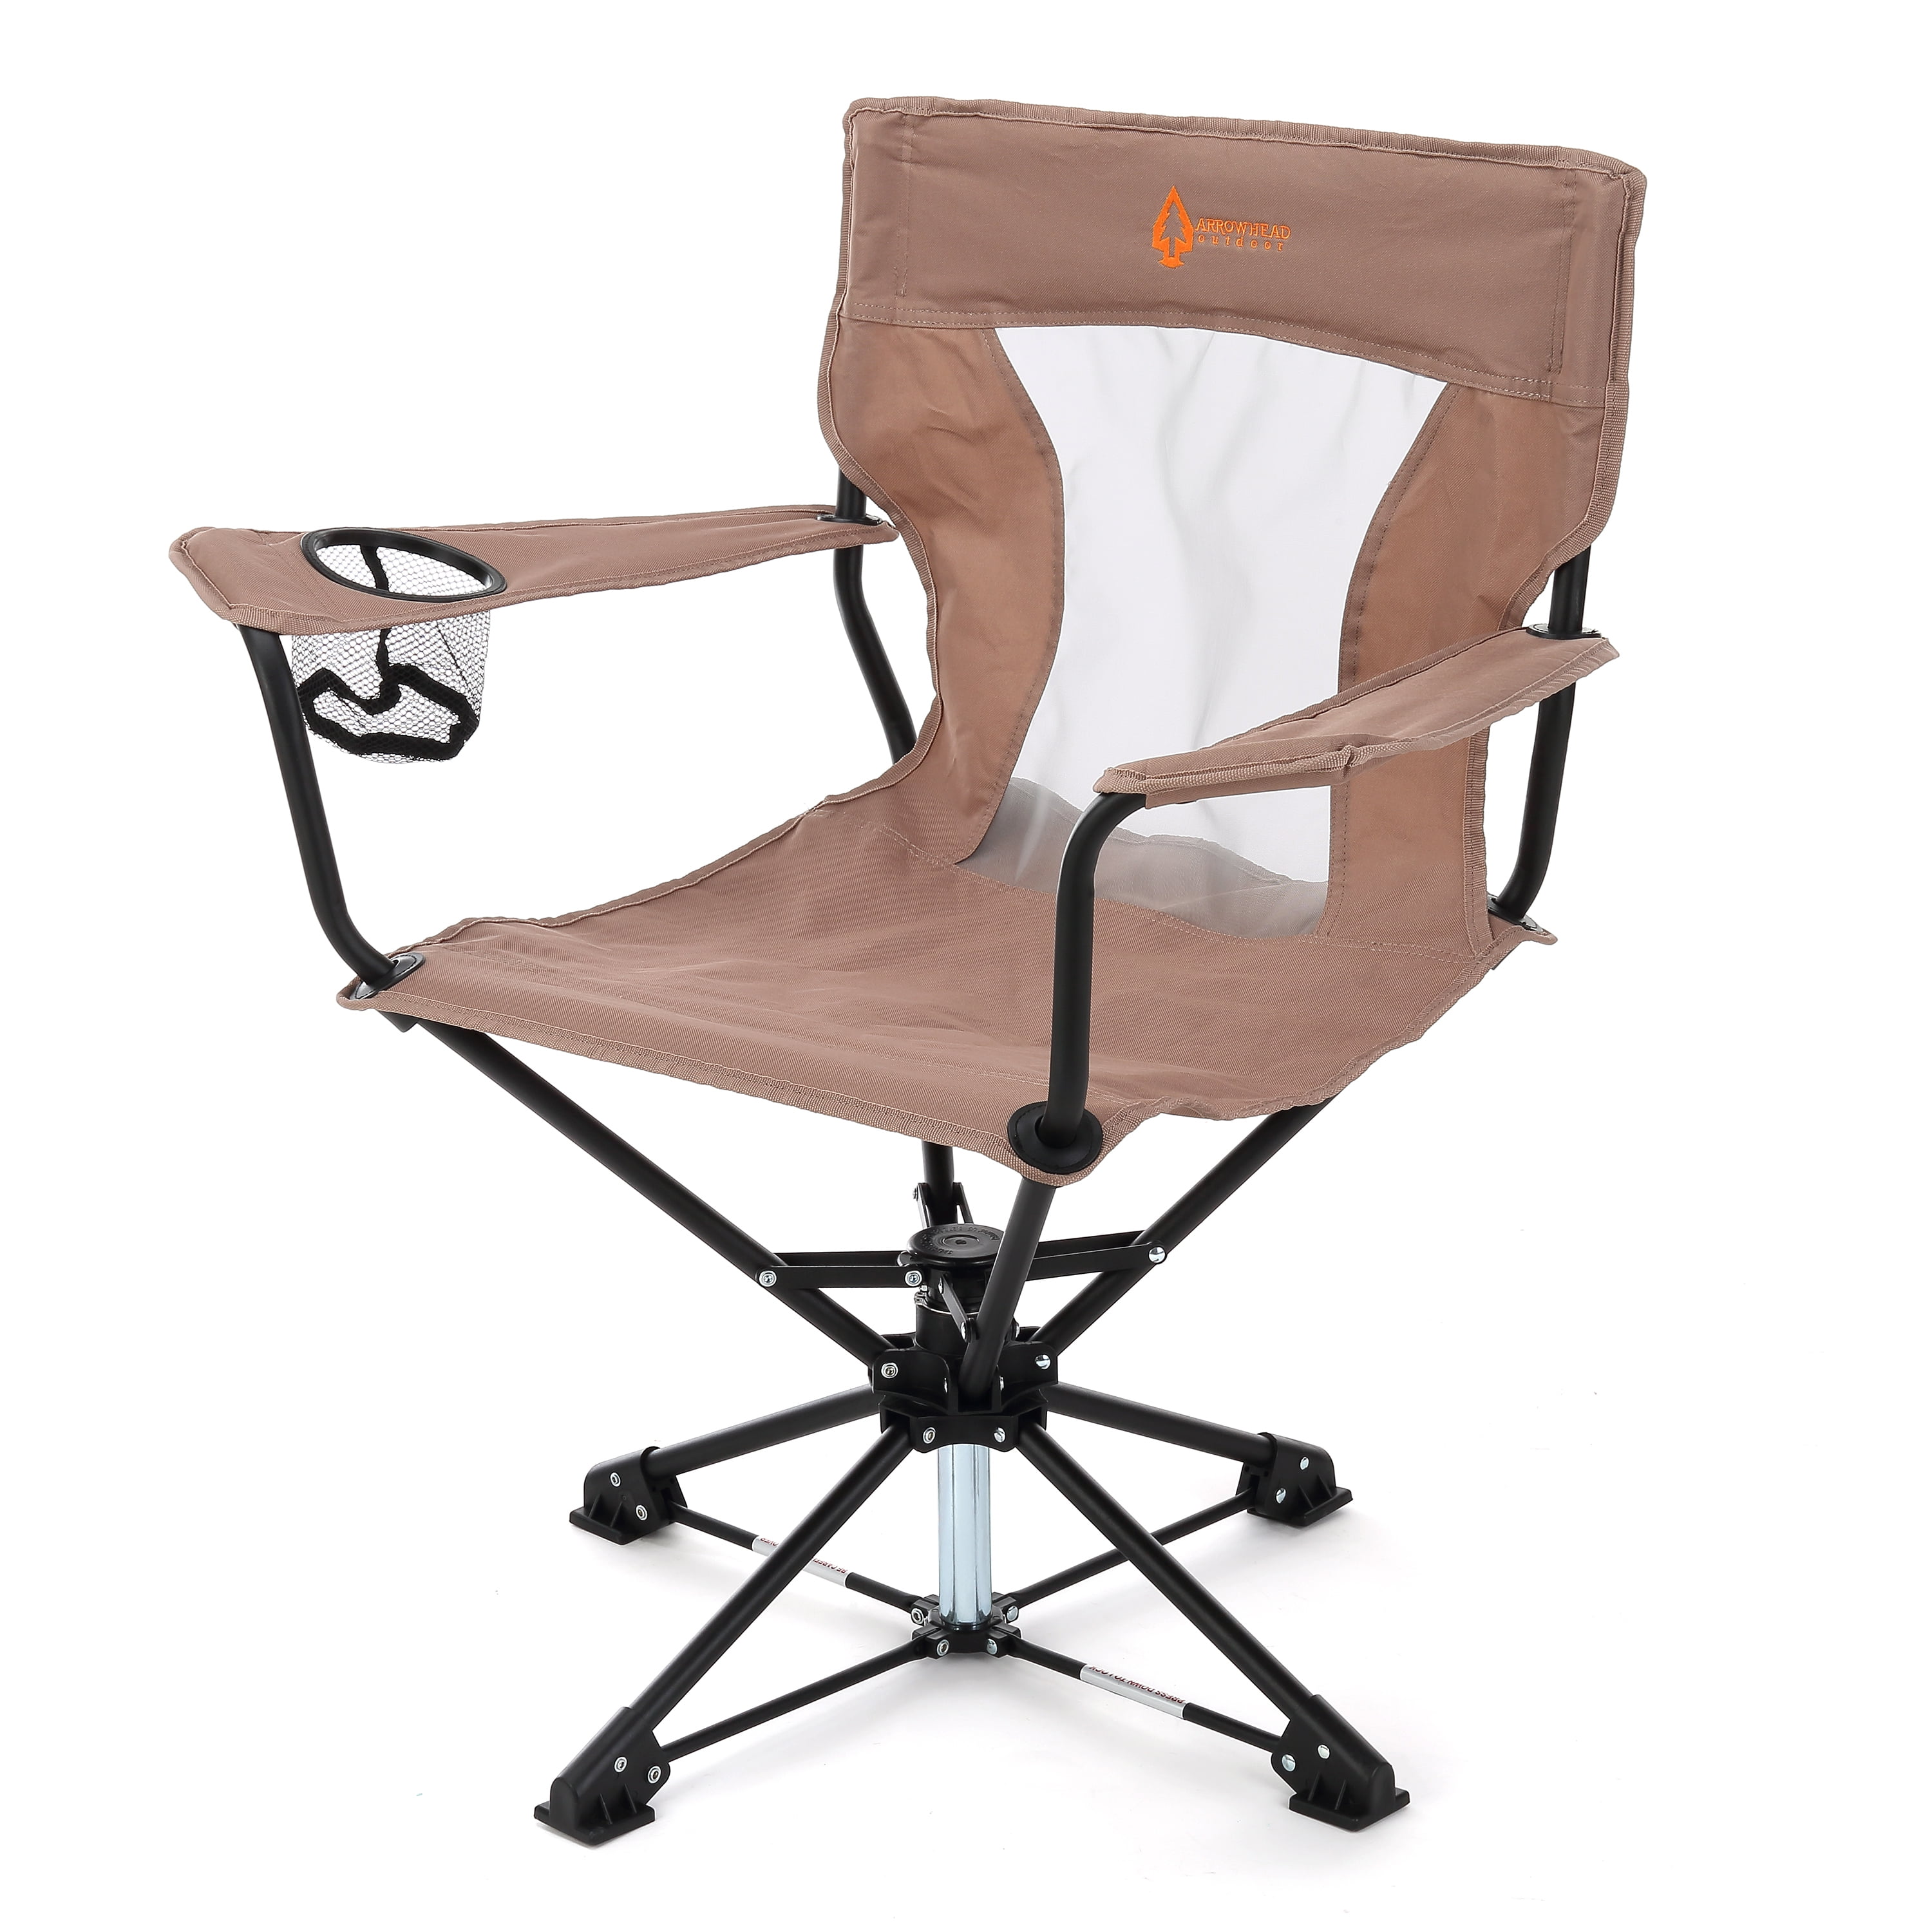 ARROWHEAD OUTDOOR 360° Degree Swivel Hunting Chair w/ Armrests, Perfect for  Blinds, No Sink Feet, Supports up to 450lbs, Carrying Case, Steel Frame,  Fishing, High-Grade 600D Canvas, USA-Based Support 